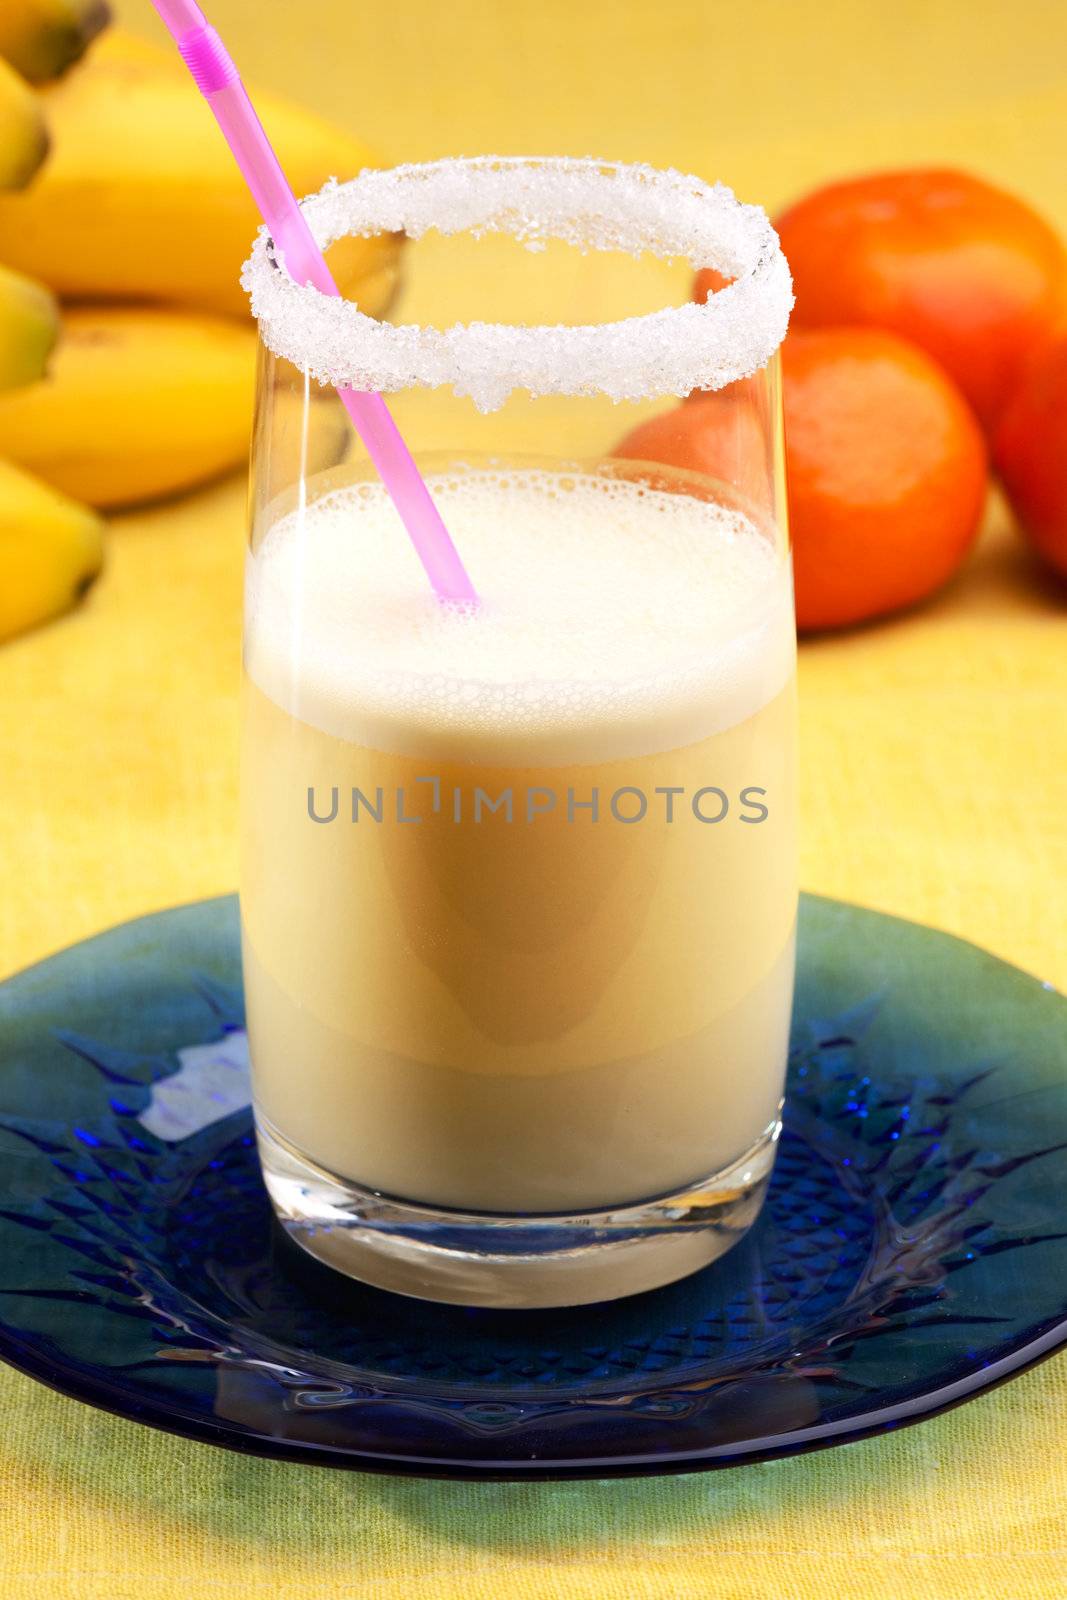 A smoothie made from oranges and bananas in an elegant glass